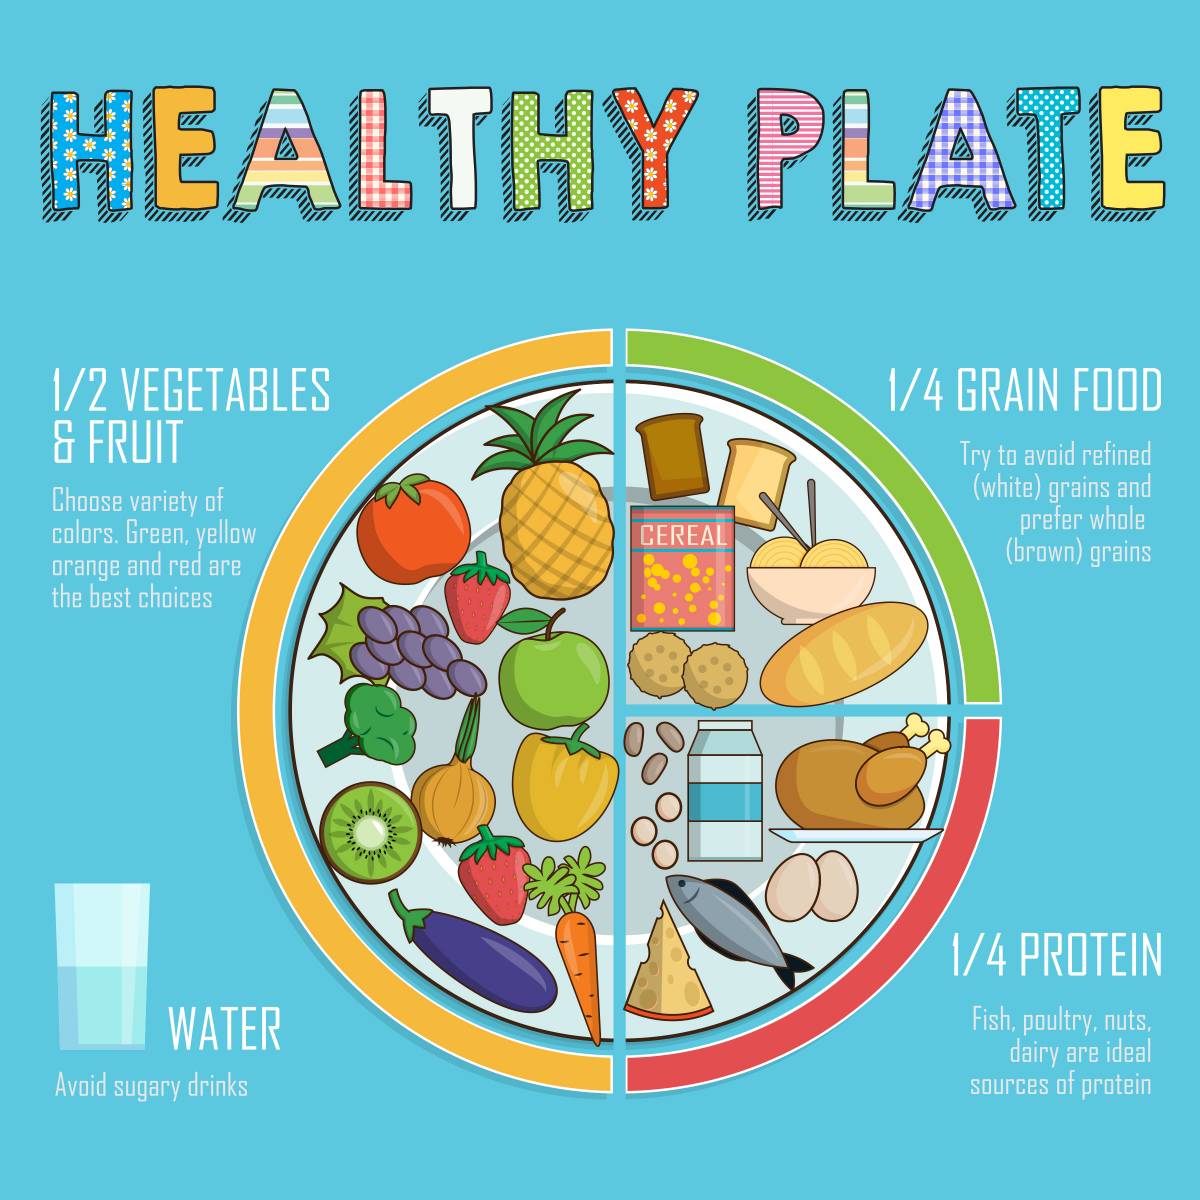 Healthy Plate 